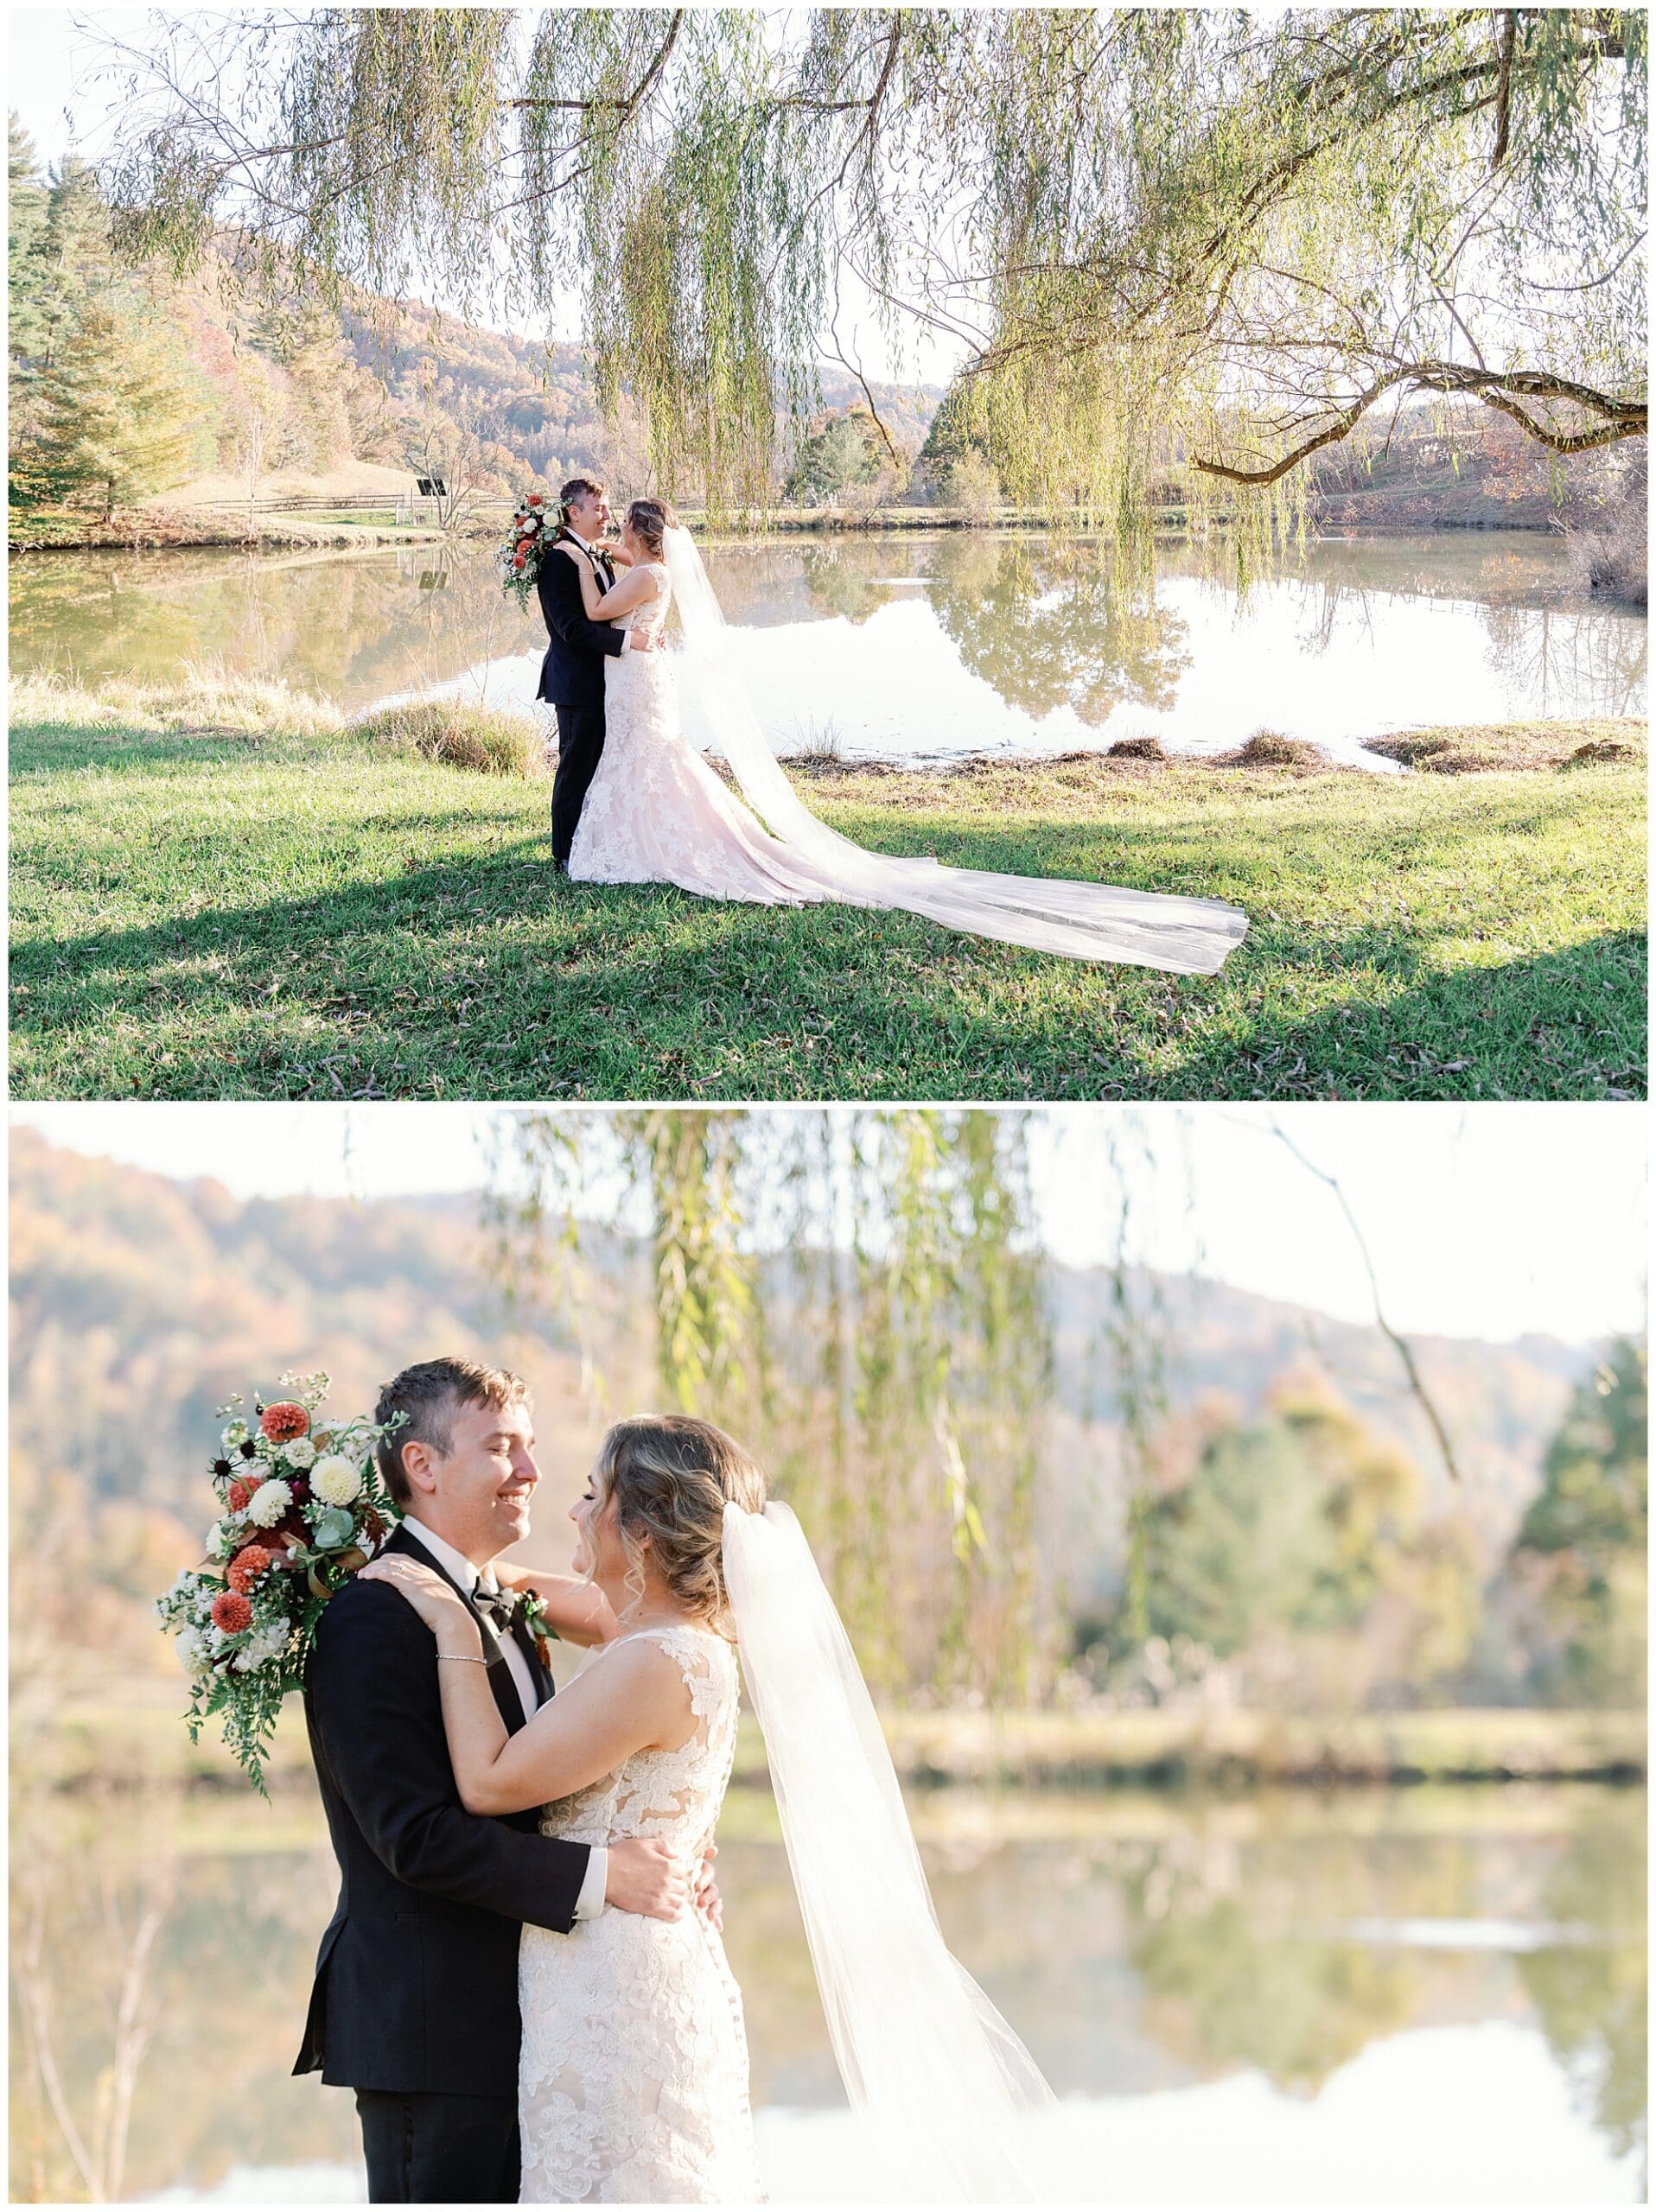 A bride and groom pose lovingly outdoors by a lake with trees, the bride in a long trailing gown and the groom in a black suit.